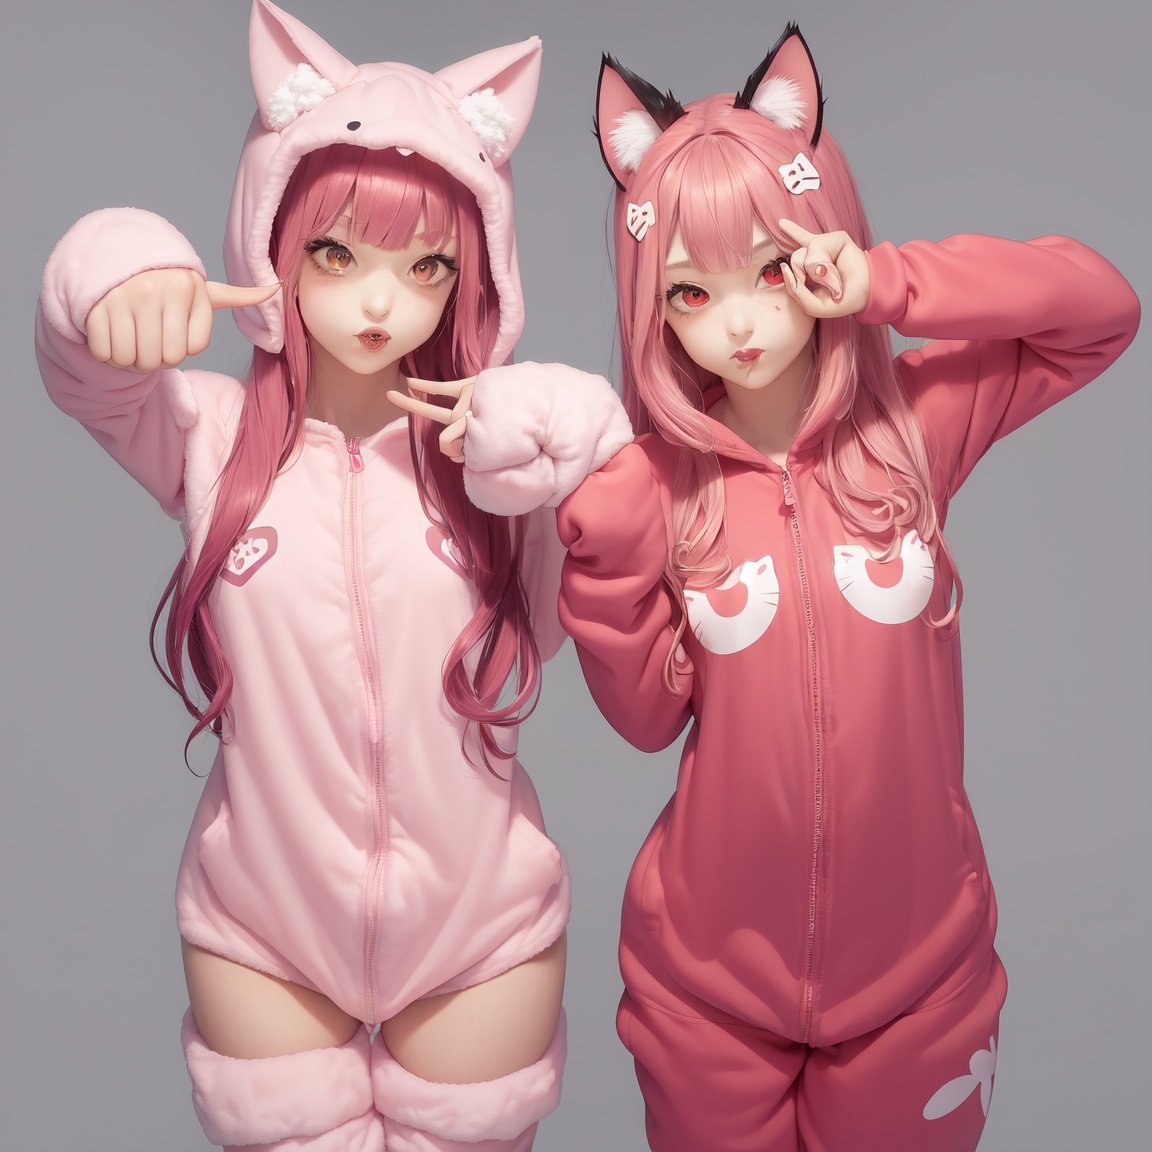 Image of 2girls, scenery, claw pose, pink hair, red eyes, :p++, curly hair, cat ears, kigurumi++,  onesie, boots, lace trim, wristband, lace trim, simple background